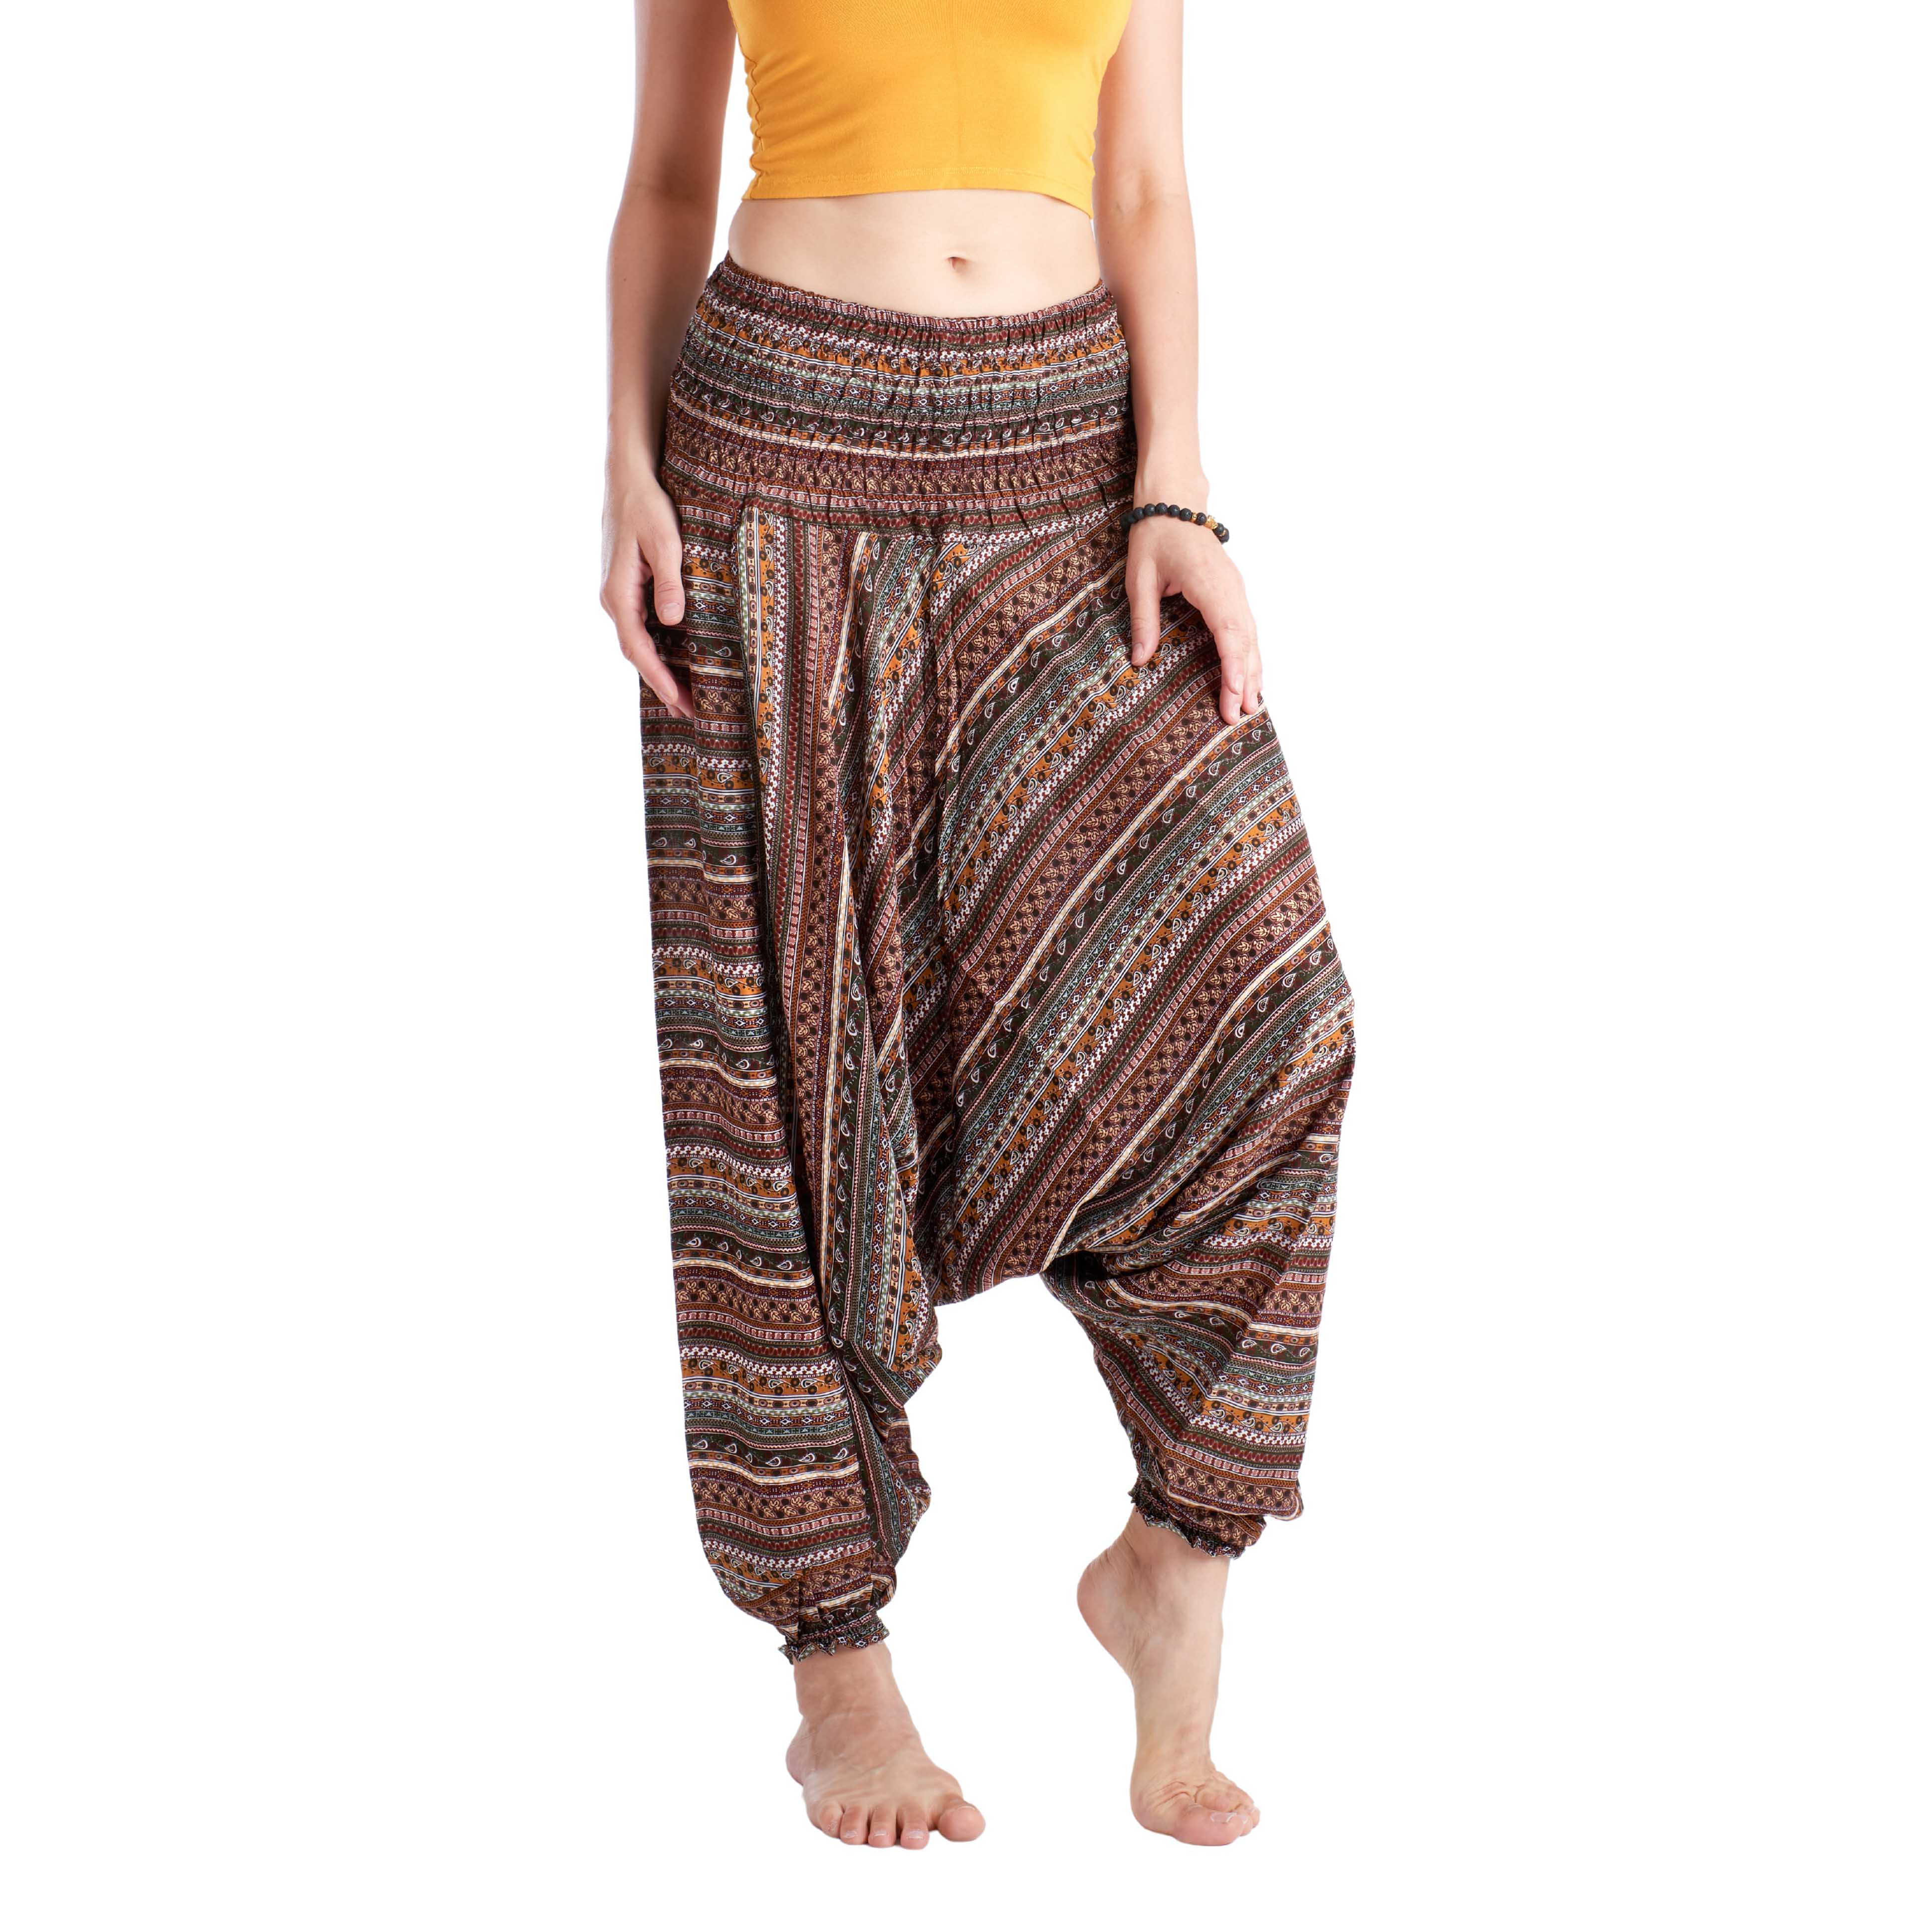 Yoga - Buy Today Elephant Pants Jewelry And Bohemian Clothes Handmade In Thailand Help To Save The Elephants FairTrade And Vegan